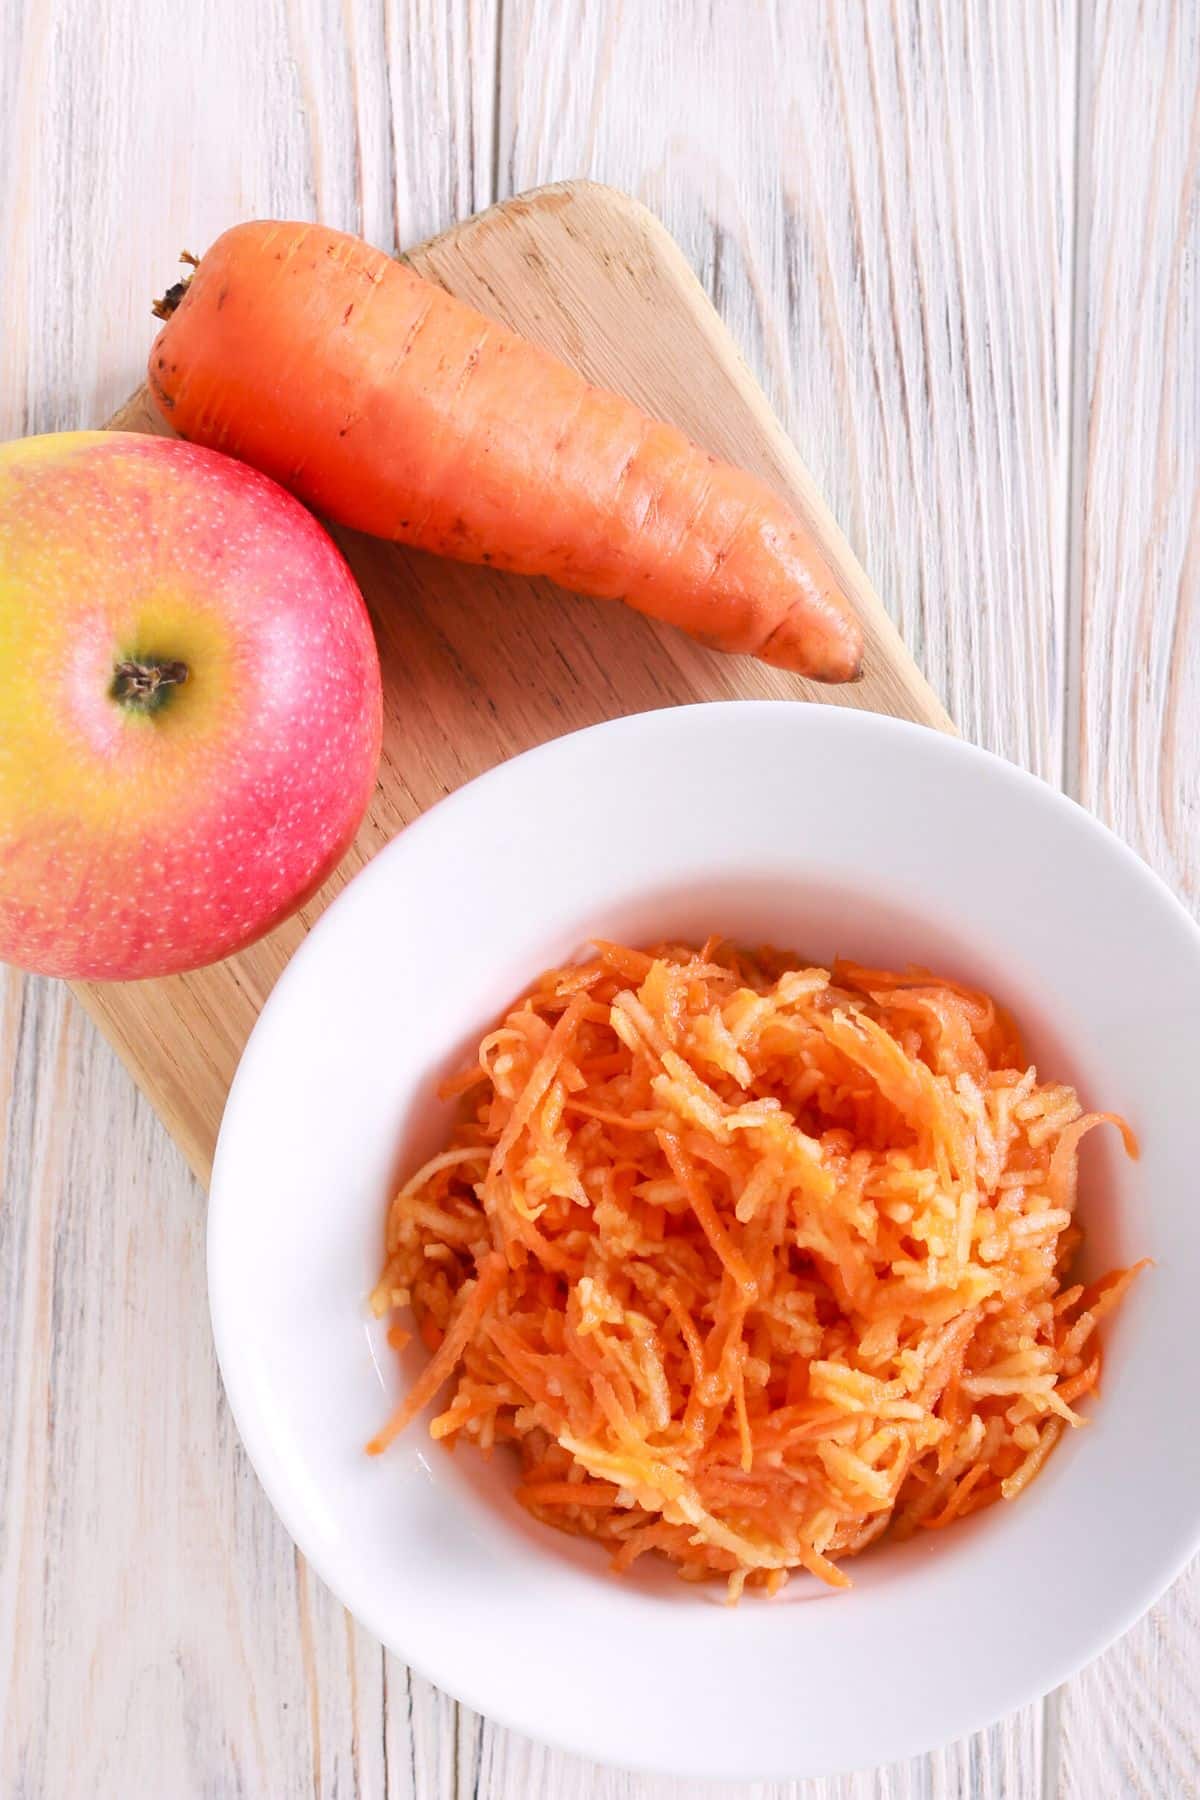 Grated carrot in a bowl next to an apple and a carrot.